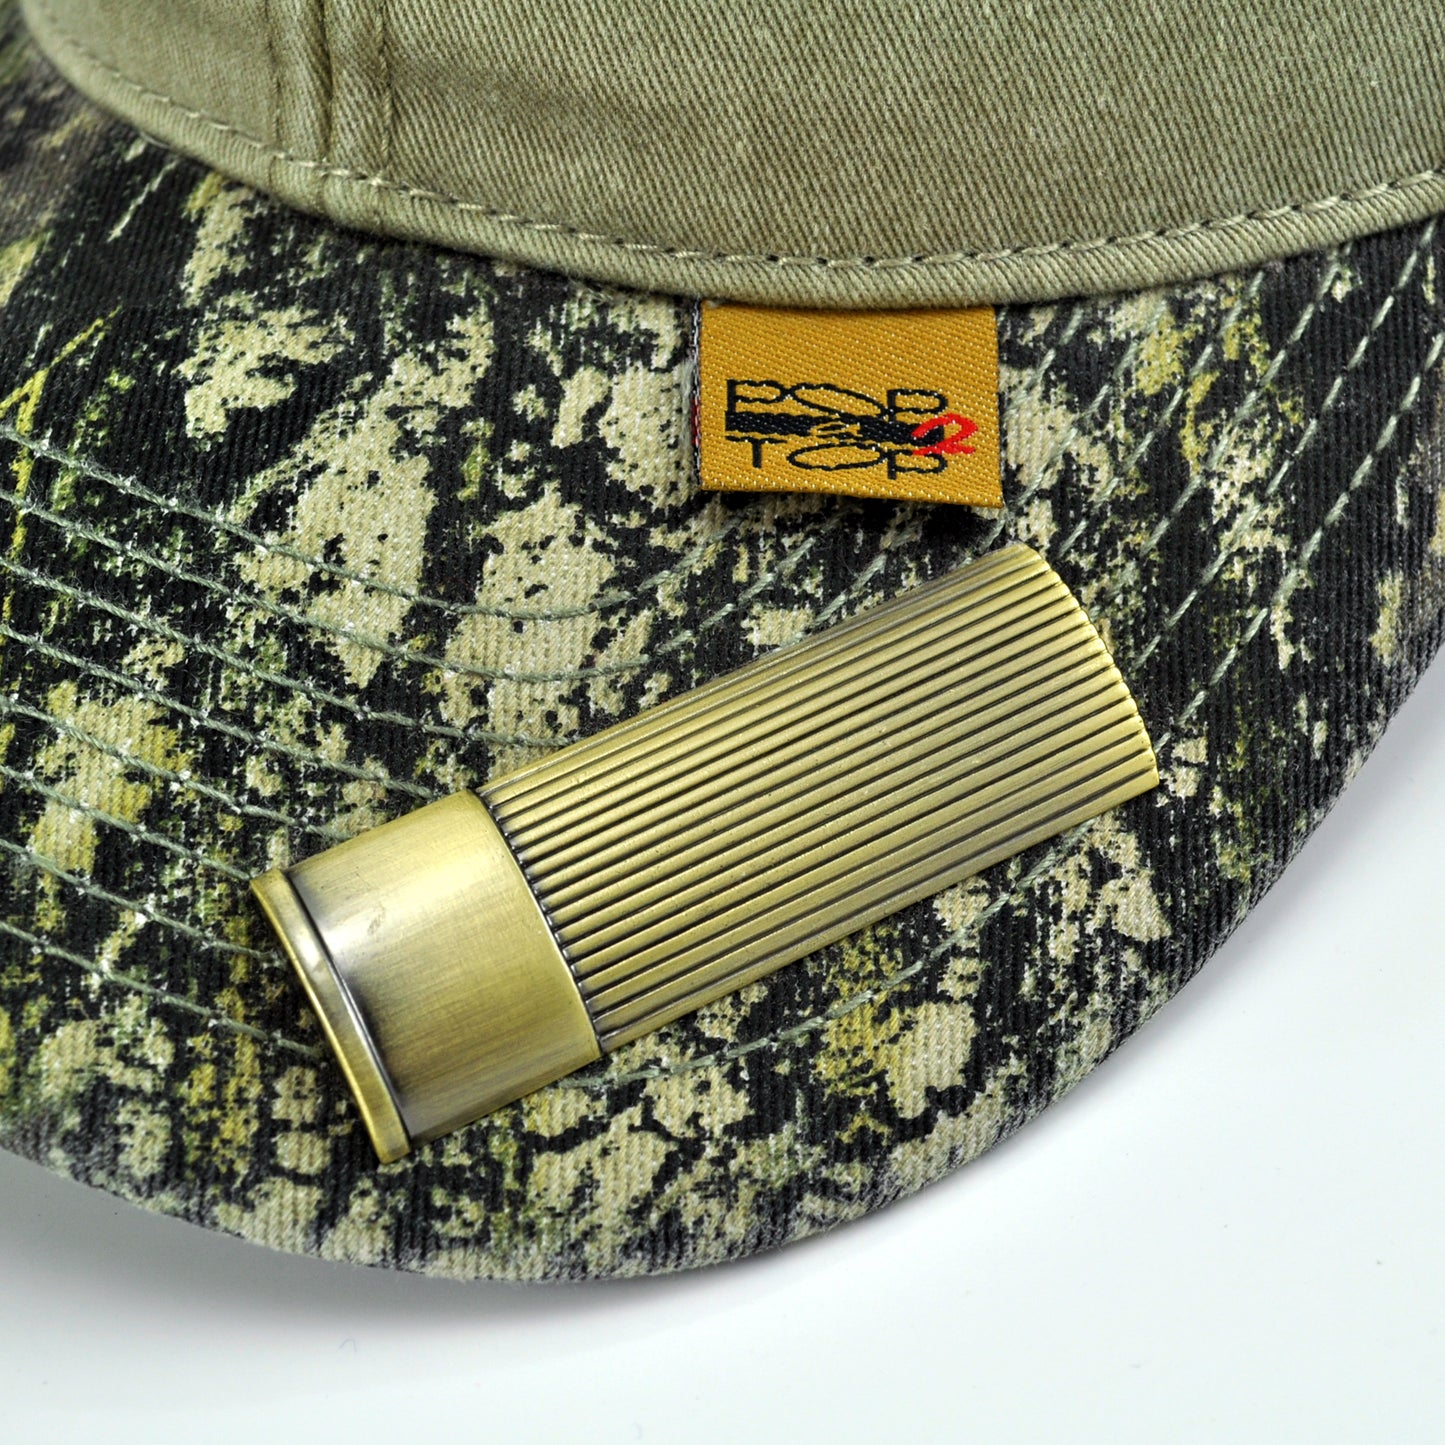 POP-A-TOP Snapback Hat with Bottle Opener Gray Camo